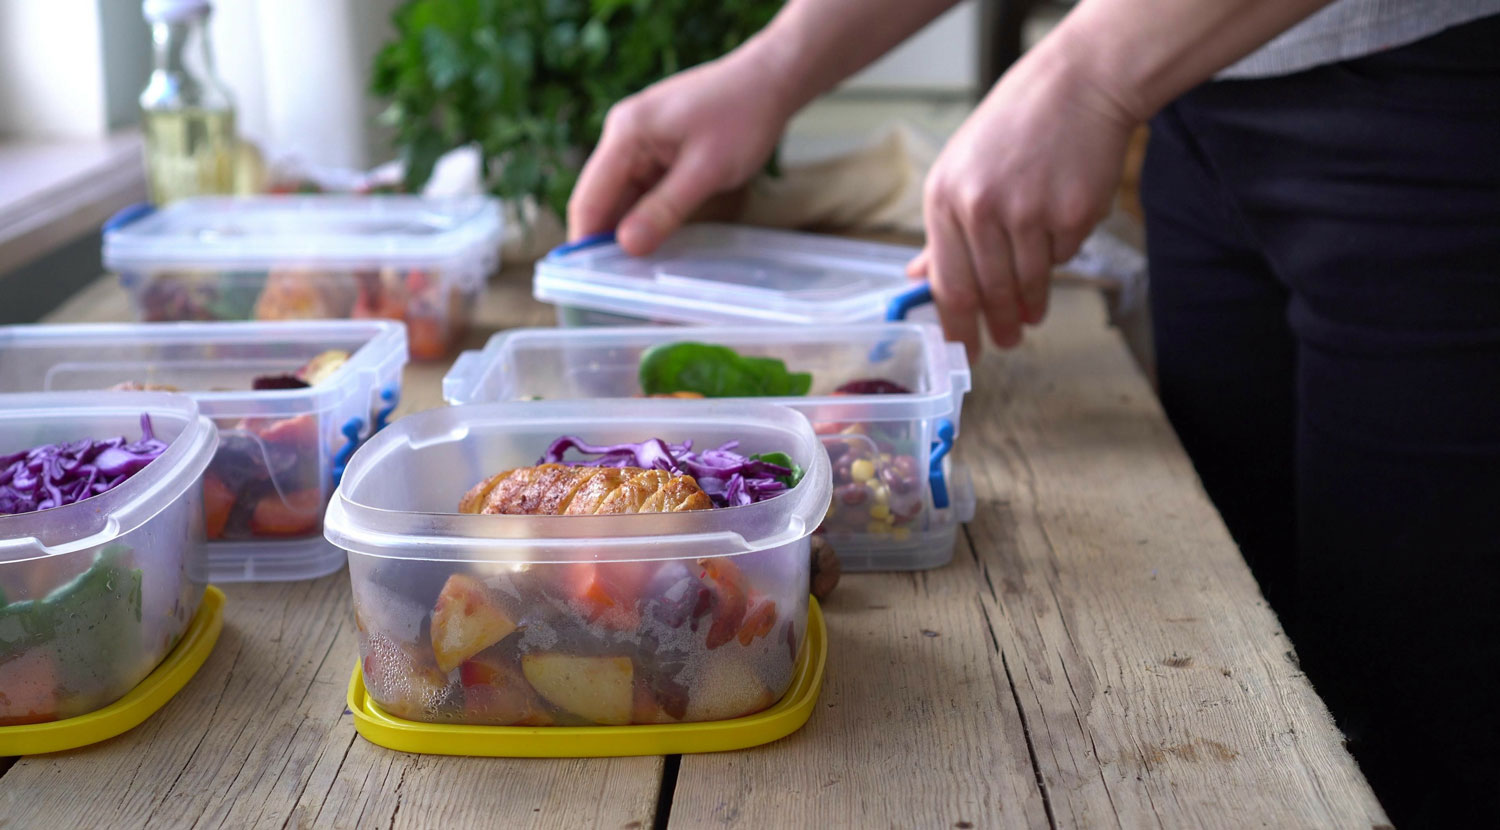 5 Best Meal Prep Containers {safe & non-toxic} - Simply Quinoa